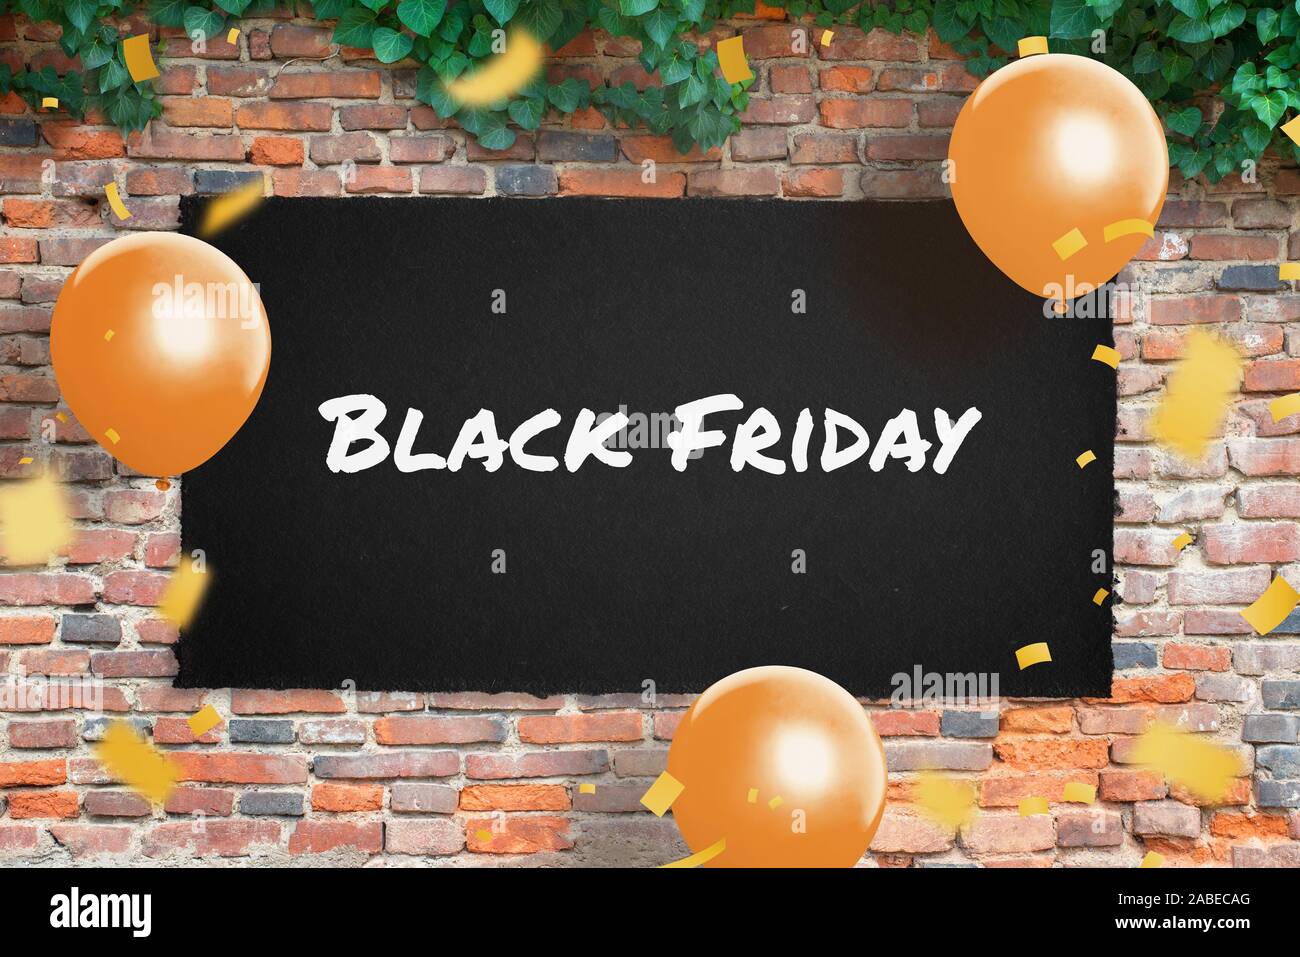 Black Friday poster on brick wall surrounded by ballons and confetti. Stock Photo